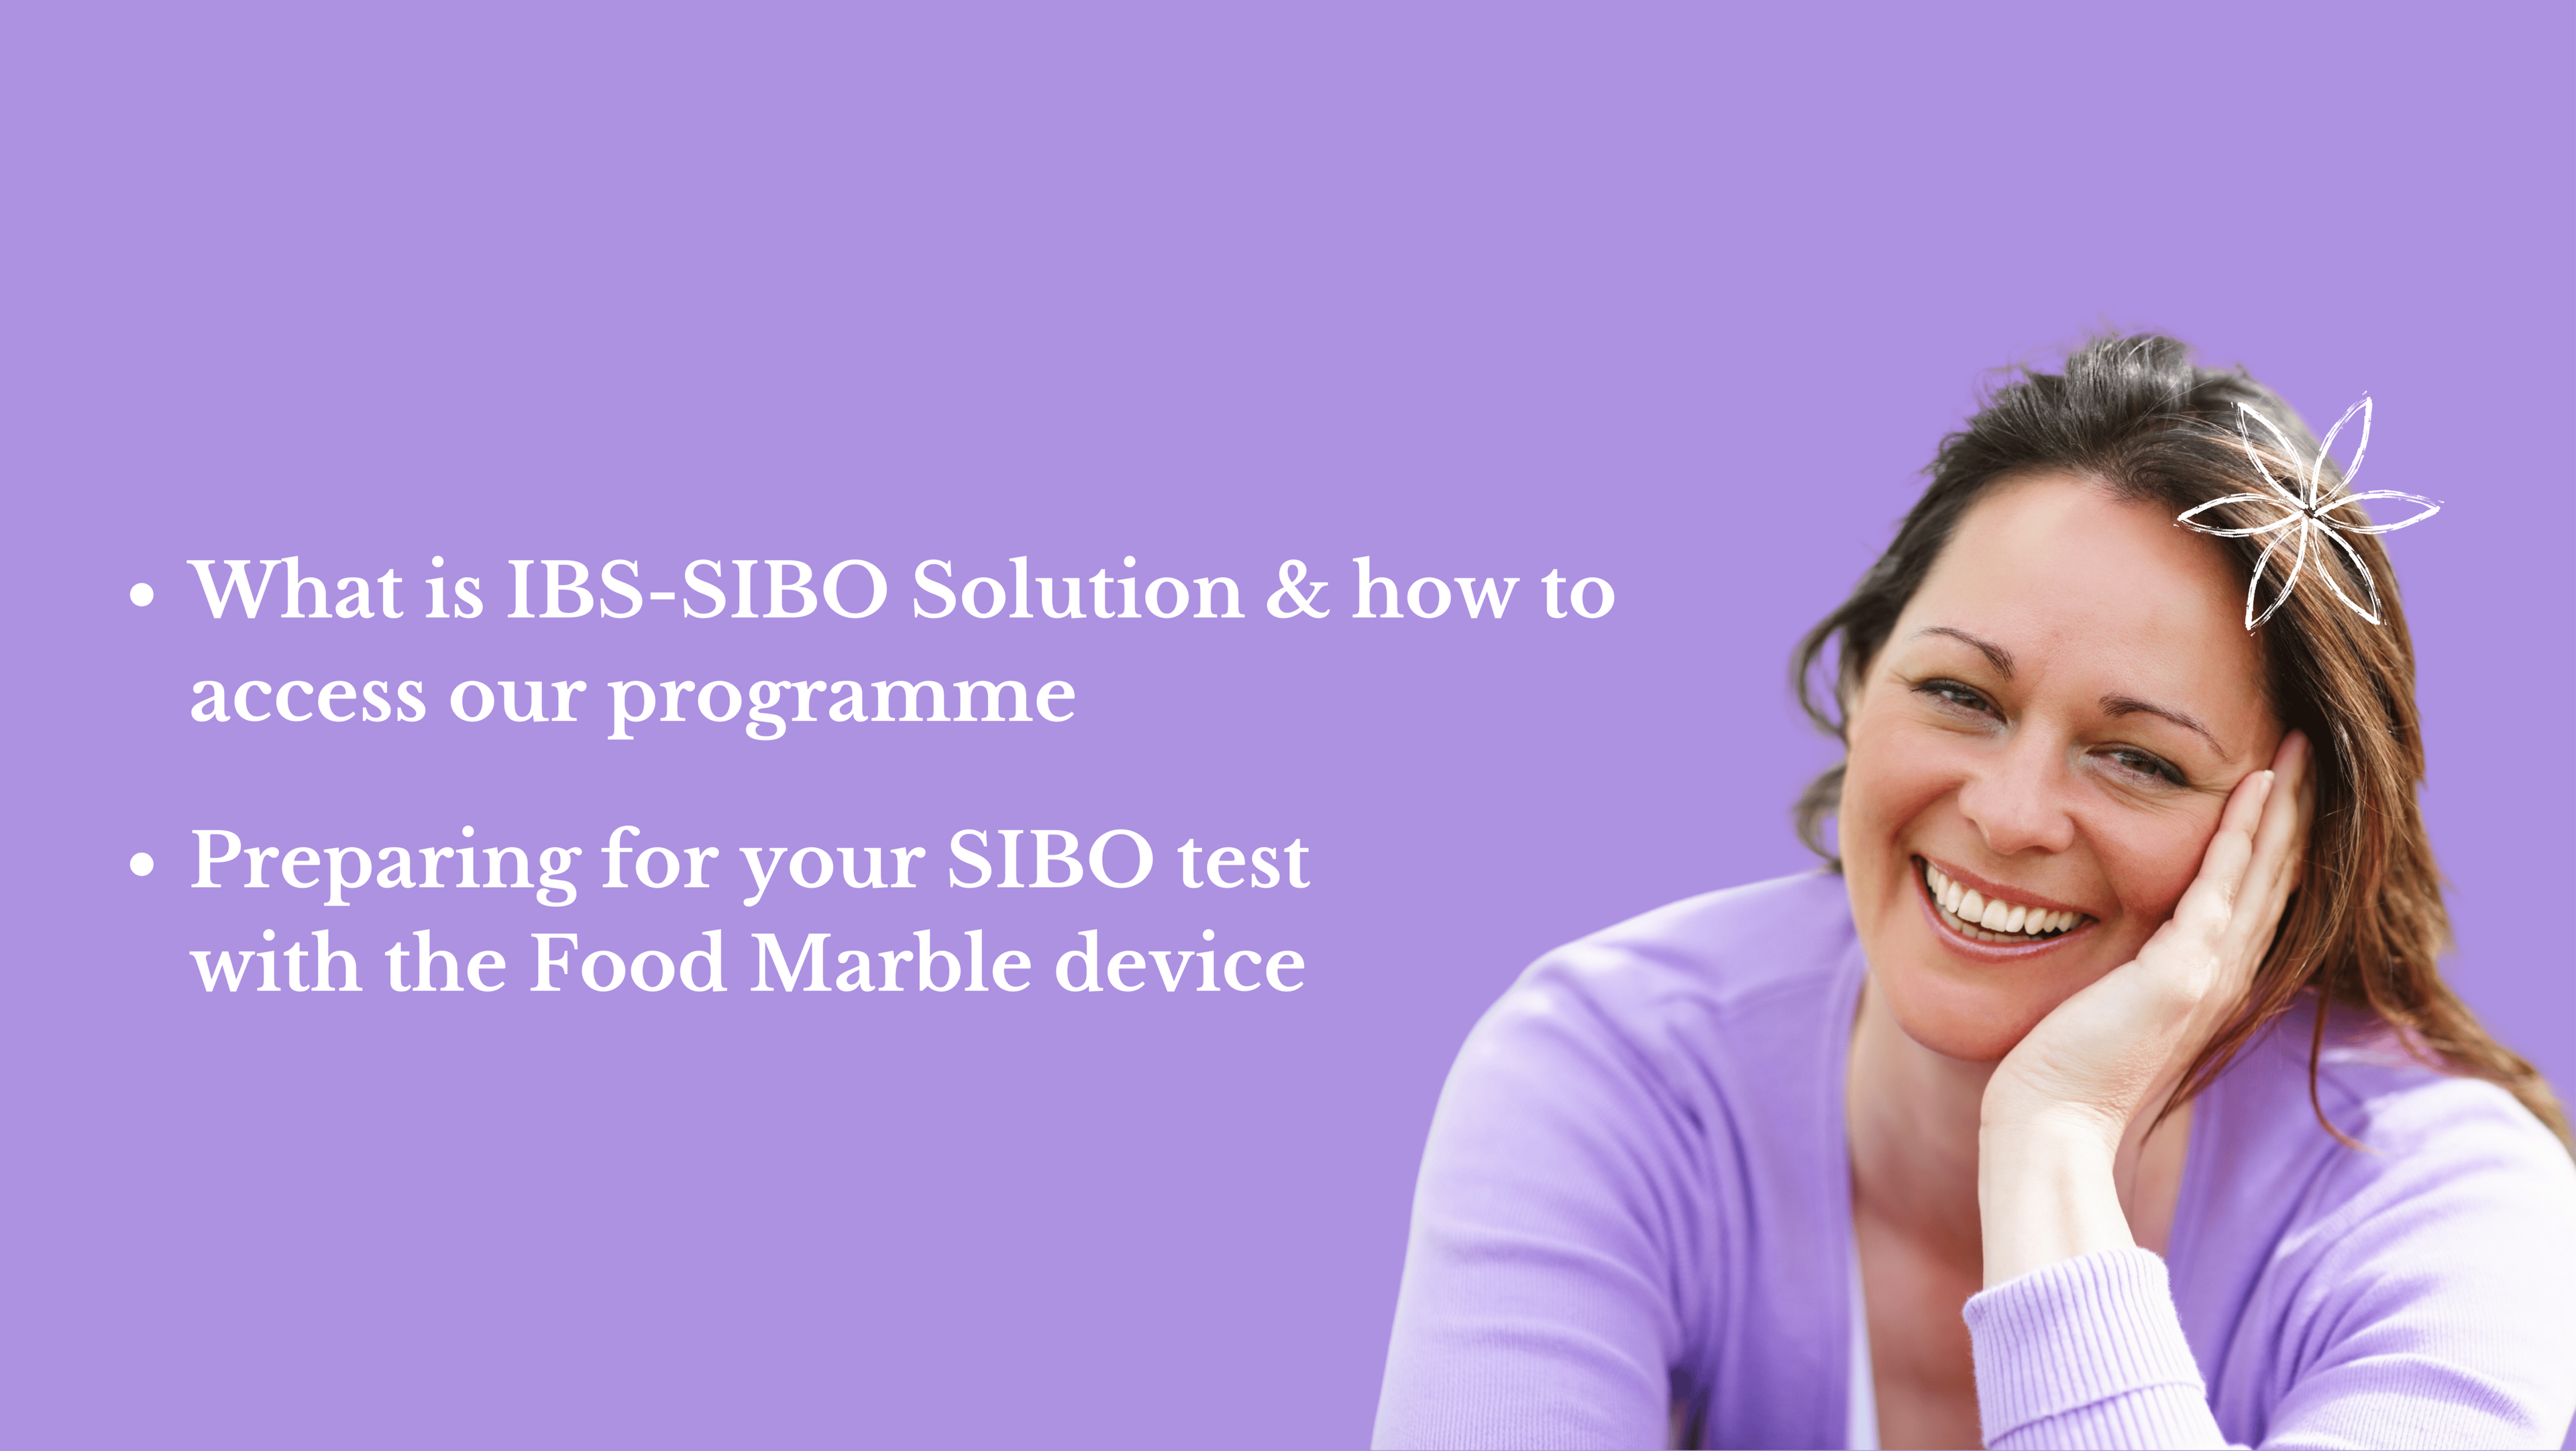 The IBS-SIBO Solution - online health programme